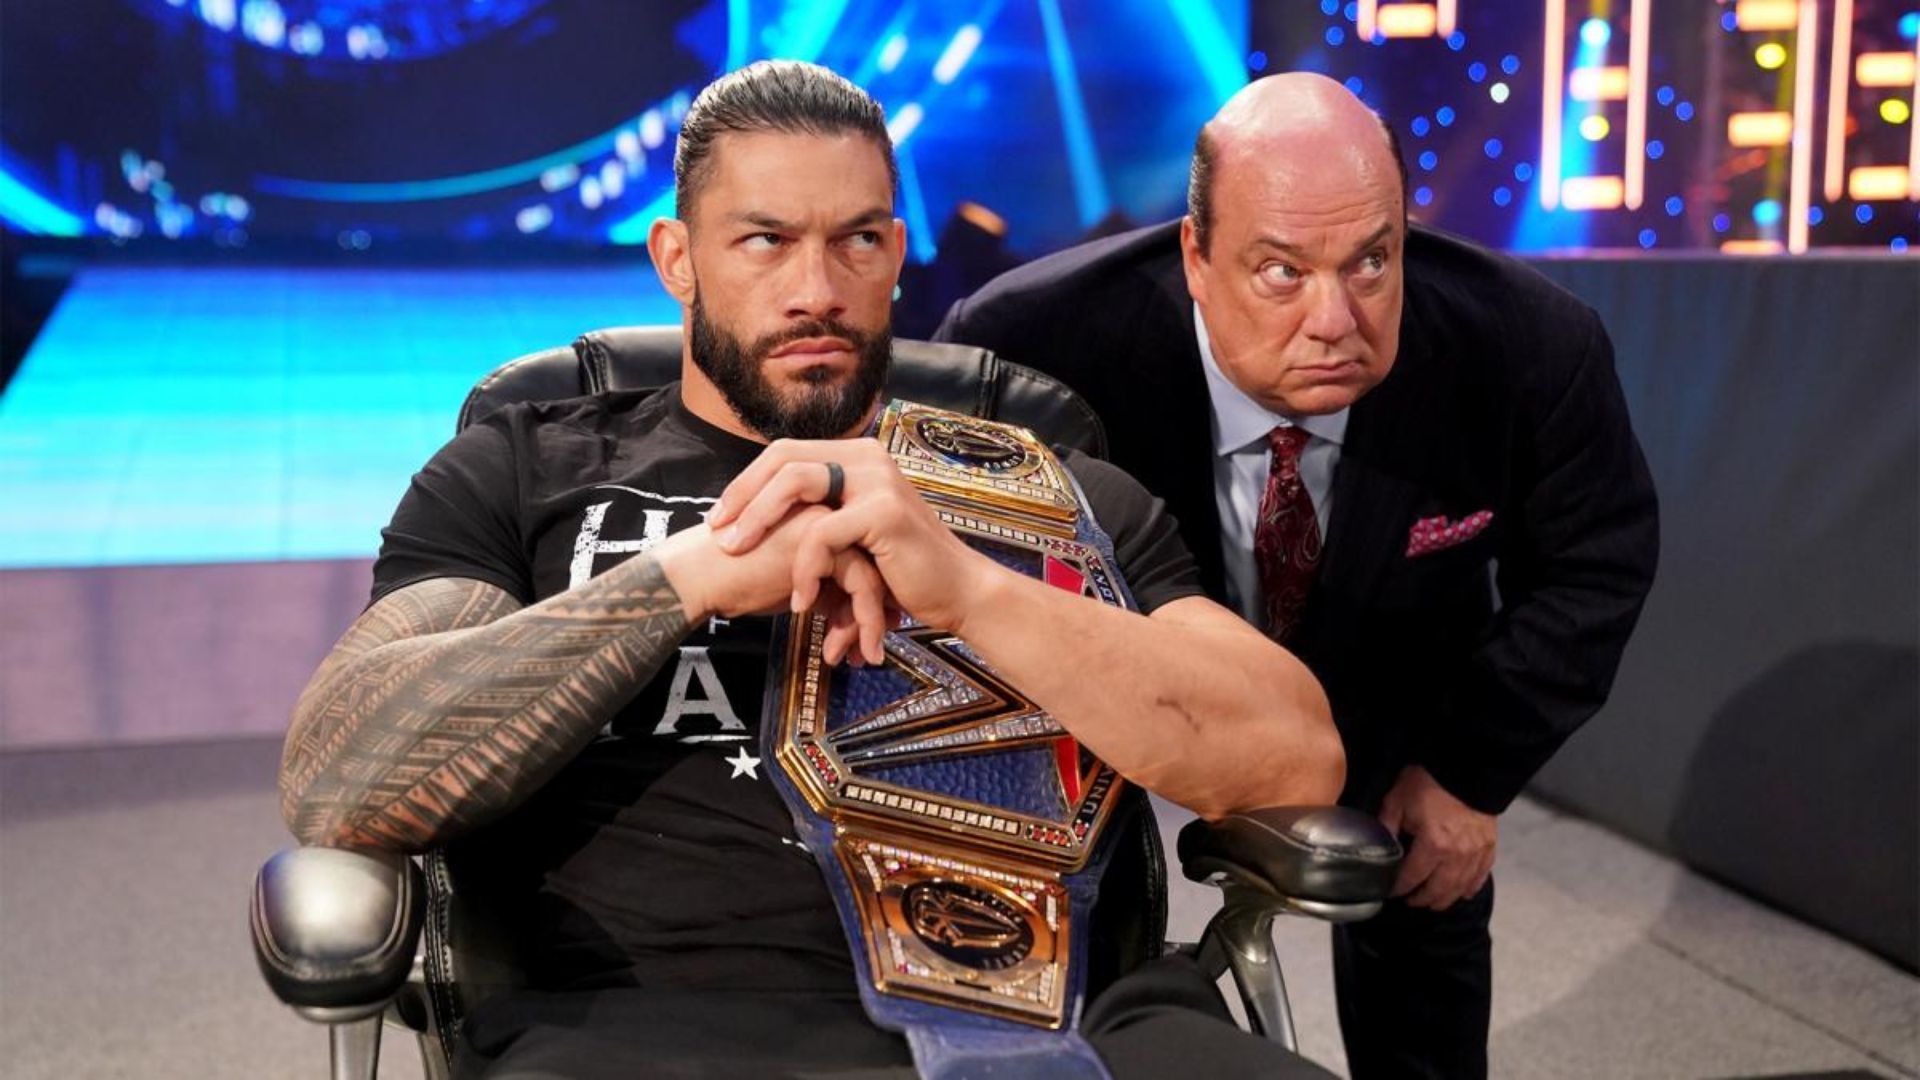 Roman Reigns and Paul Heyman have achieved great success together since their pairing.